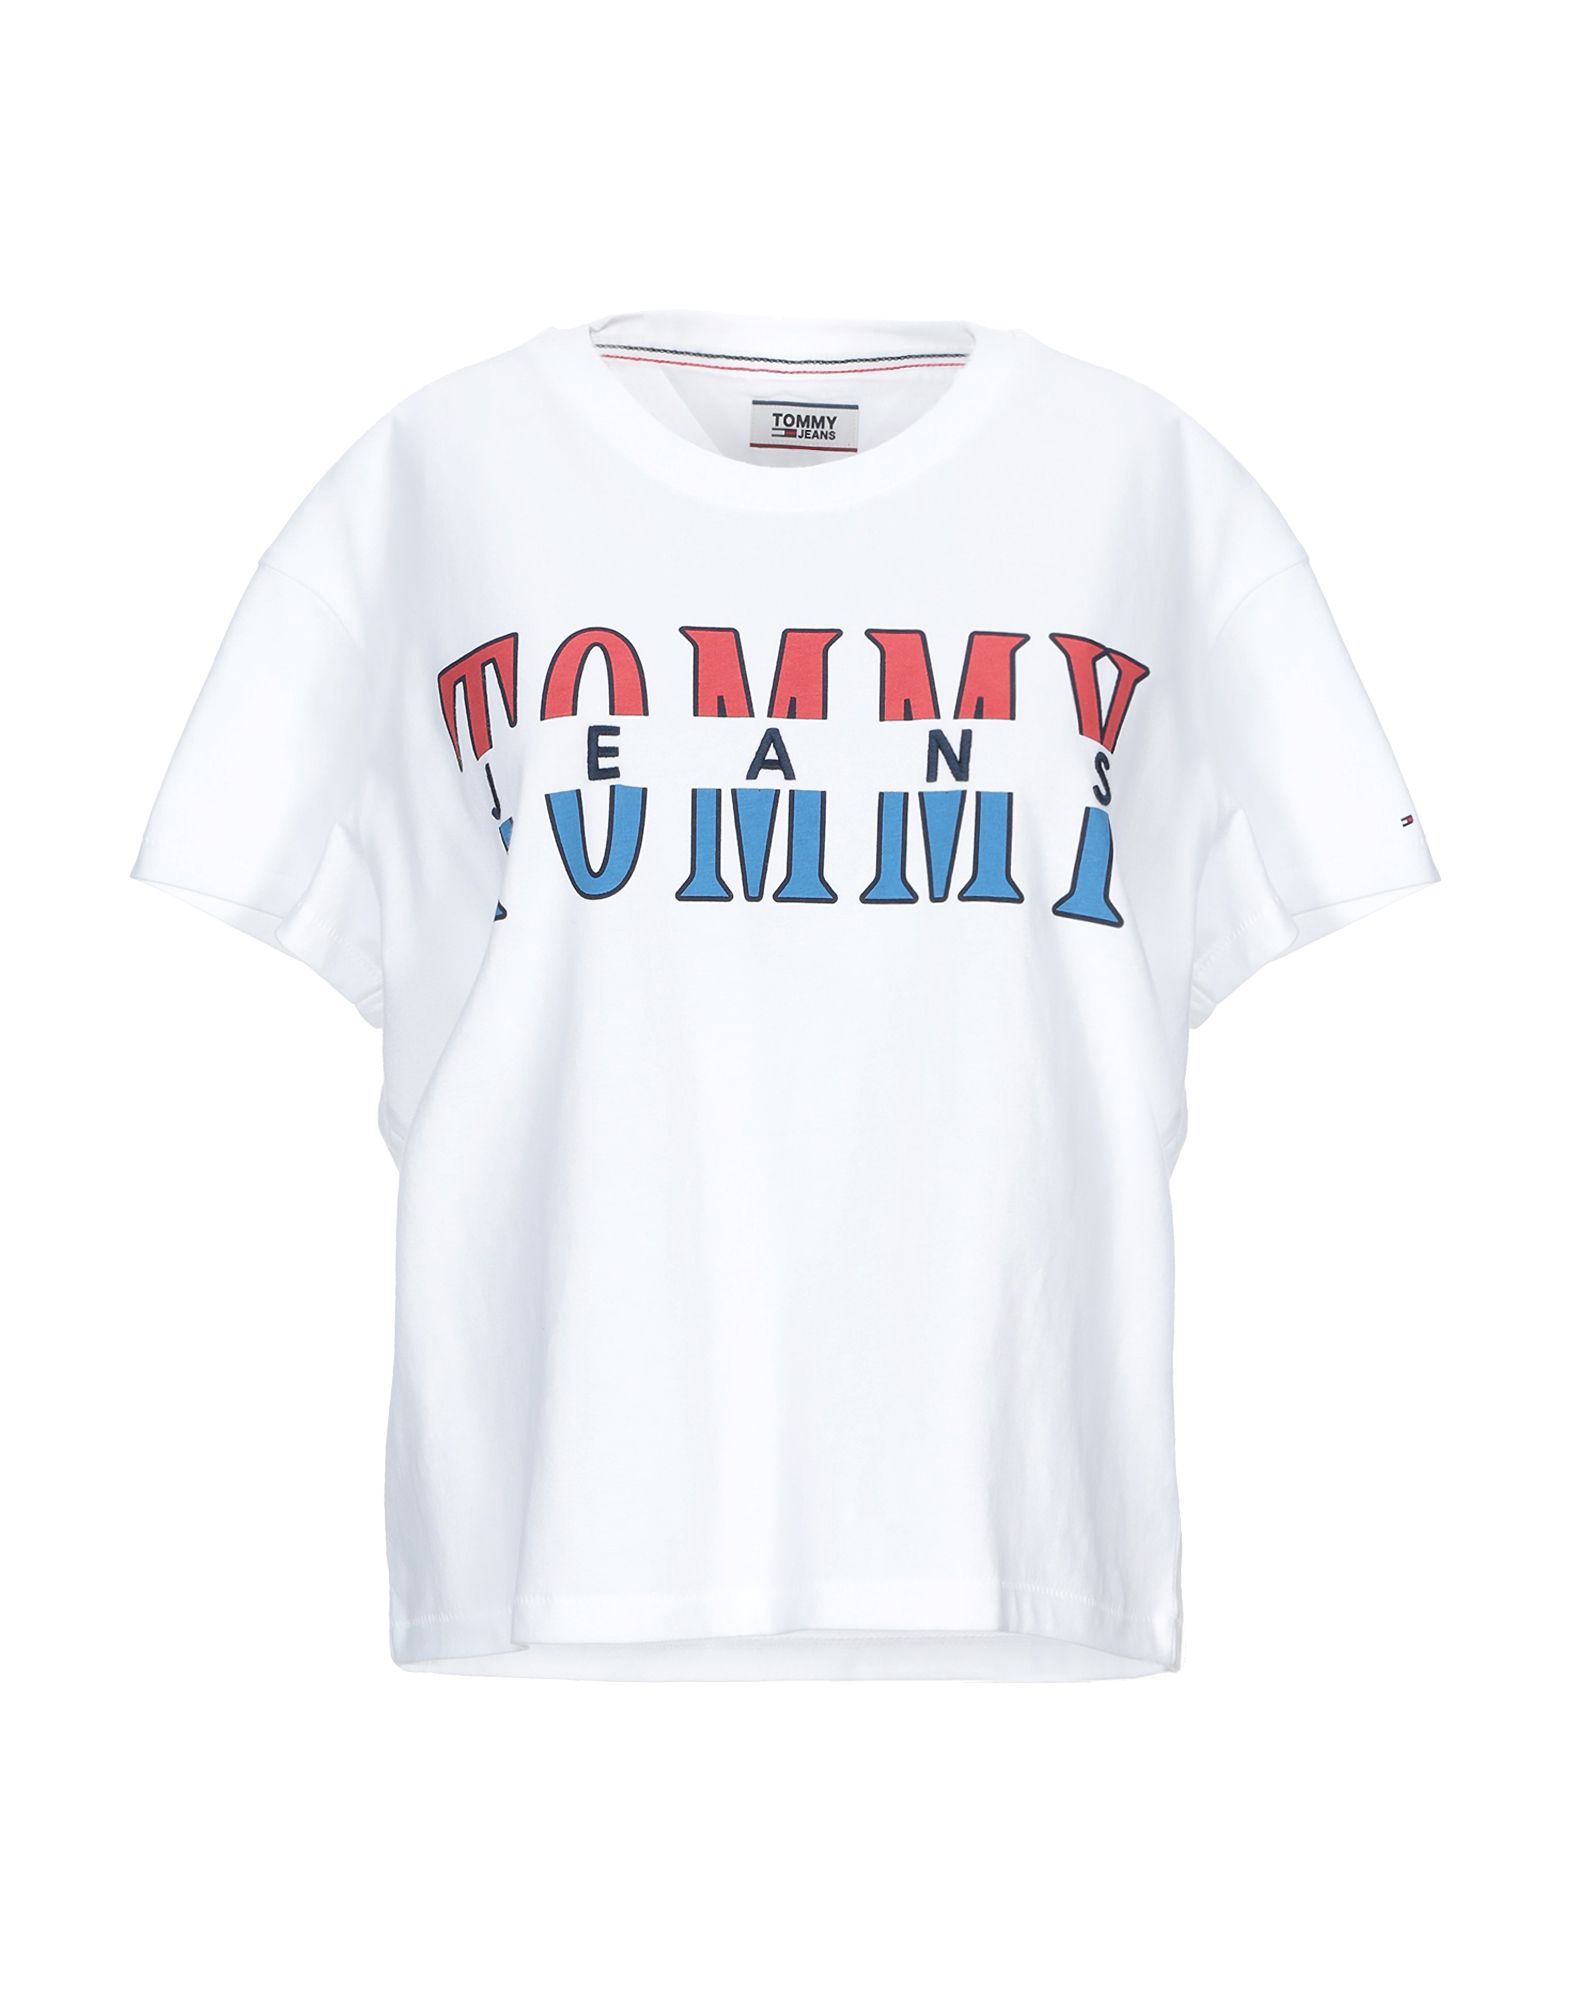 Tommy Jeans T Shirt Flash Sales, 54% OFF | www.hcb.cat